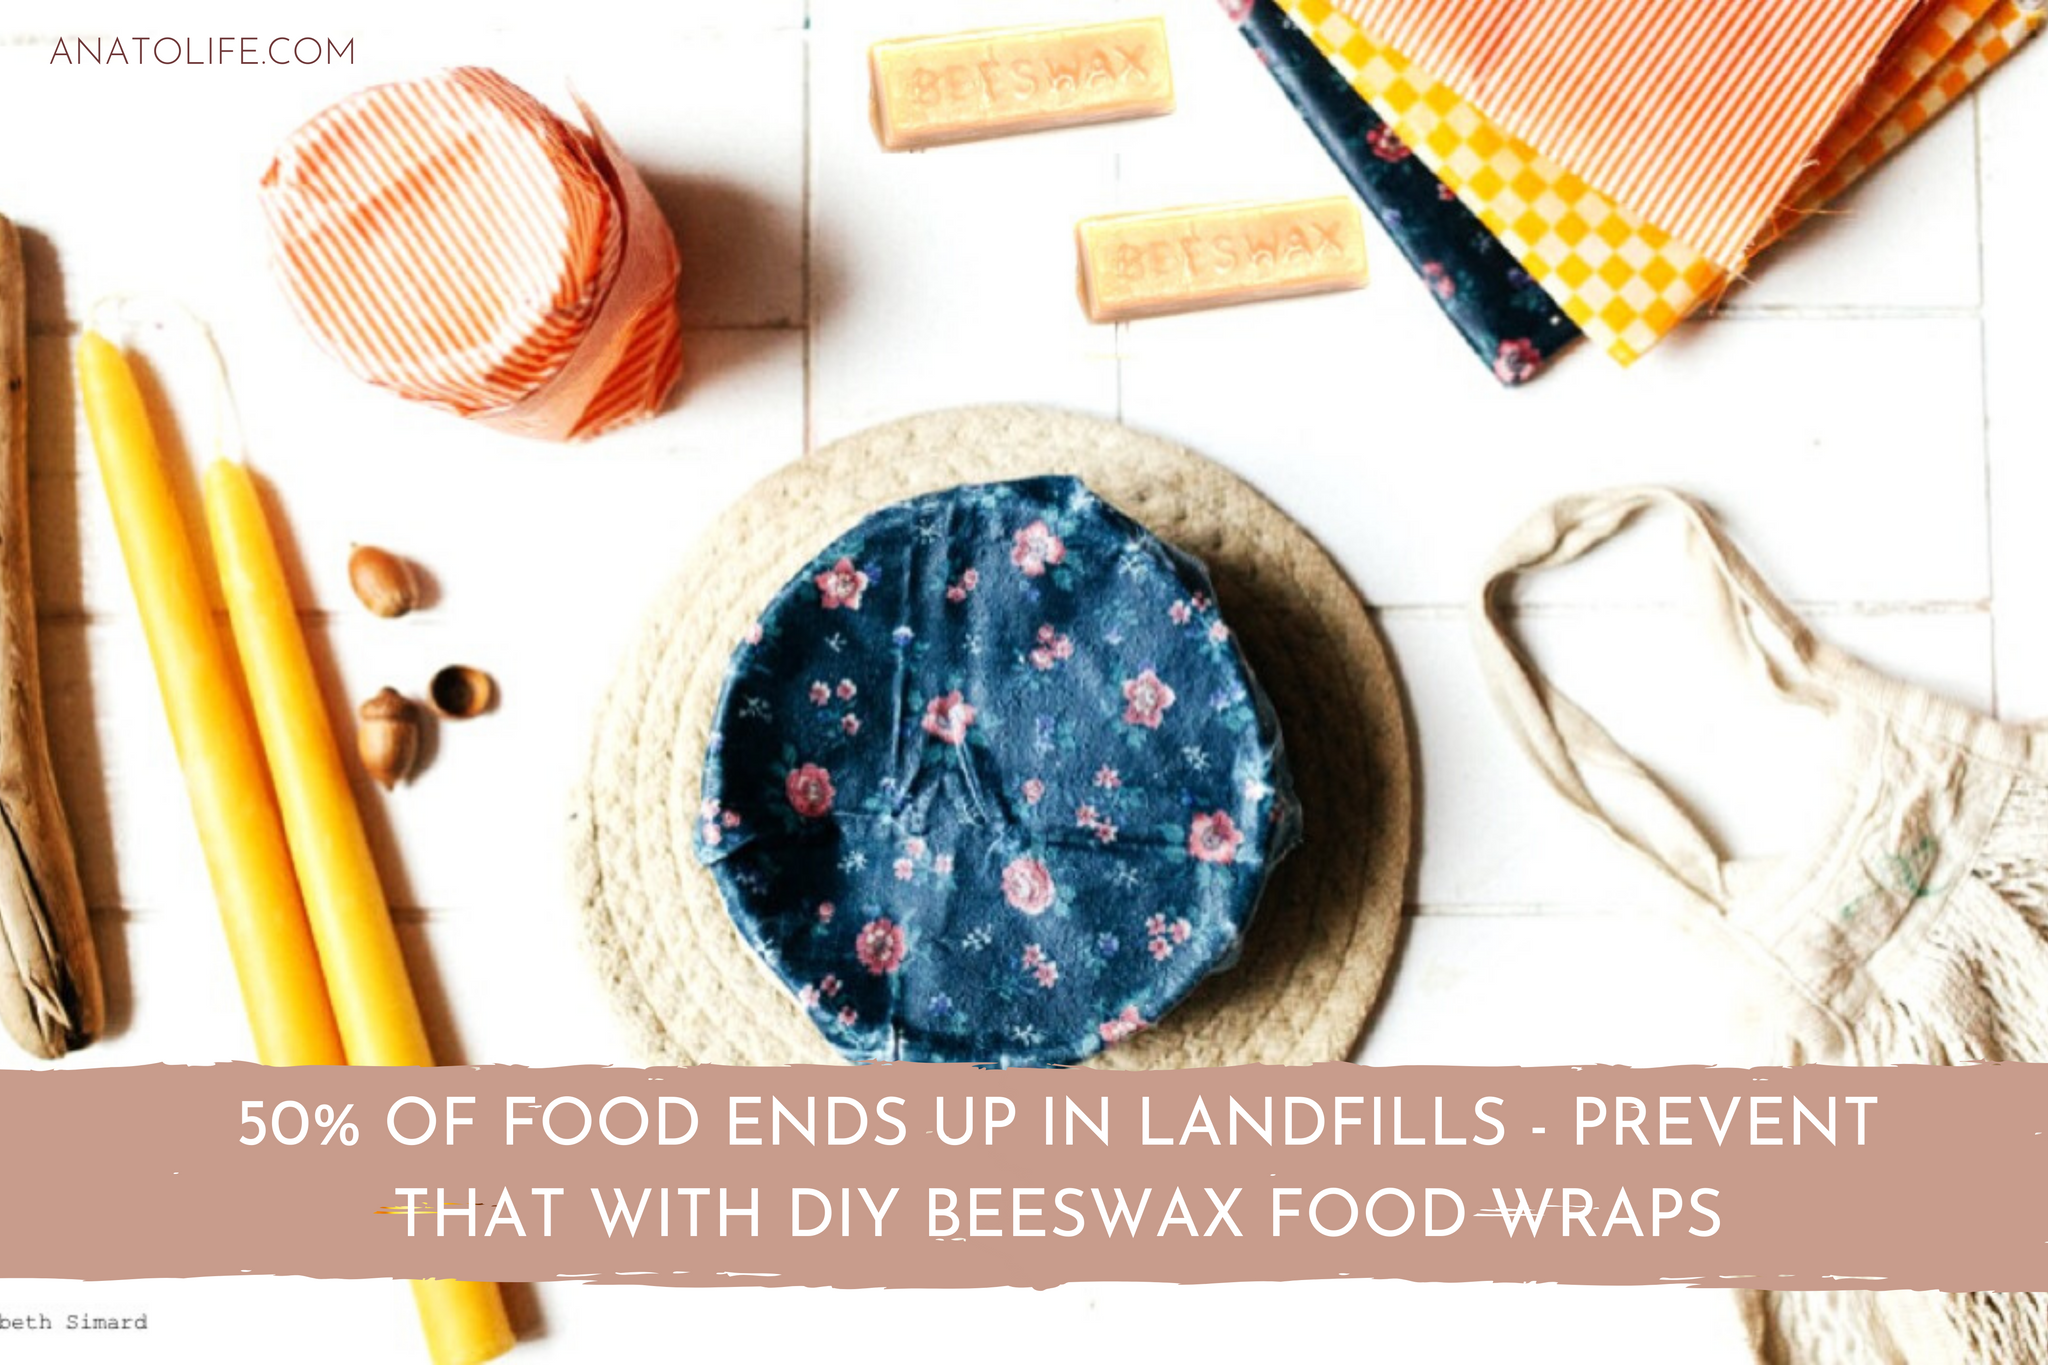 50% of food ends up in landfills - Prevent that with DIY Beeswax Food Wraps